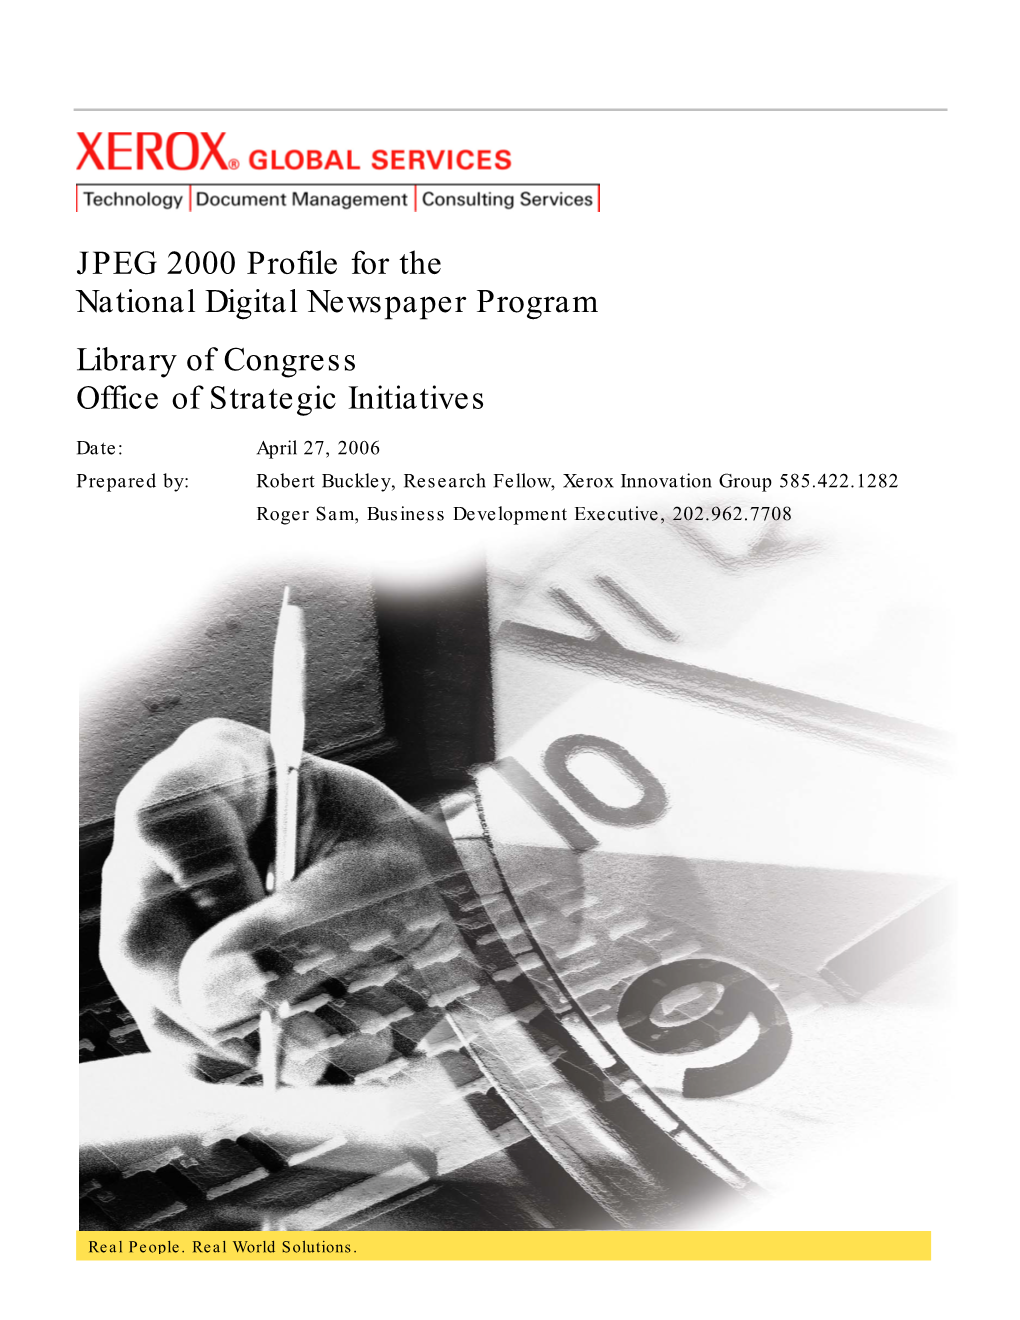 JPEG 2000 Profile for the National Digital Newspaper Program Library of Congress Office of Strategic Initiatives